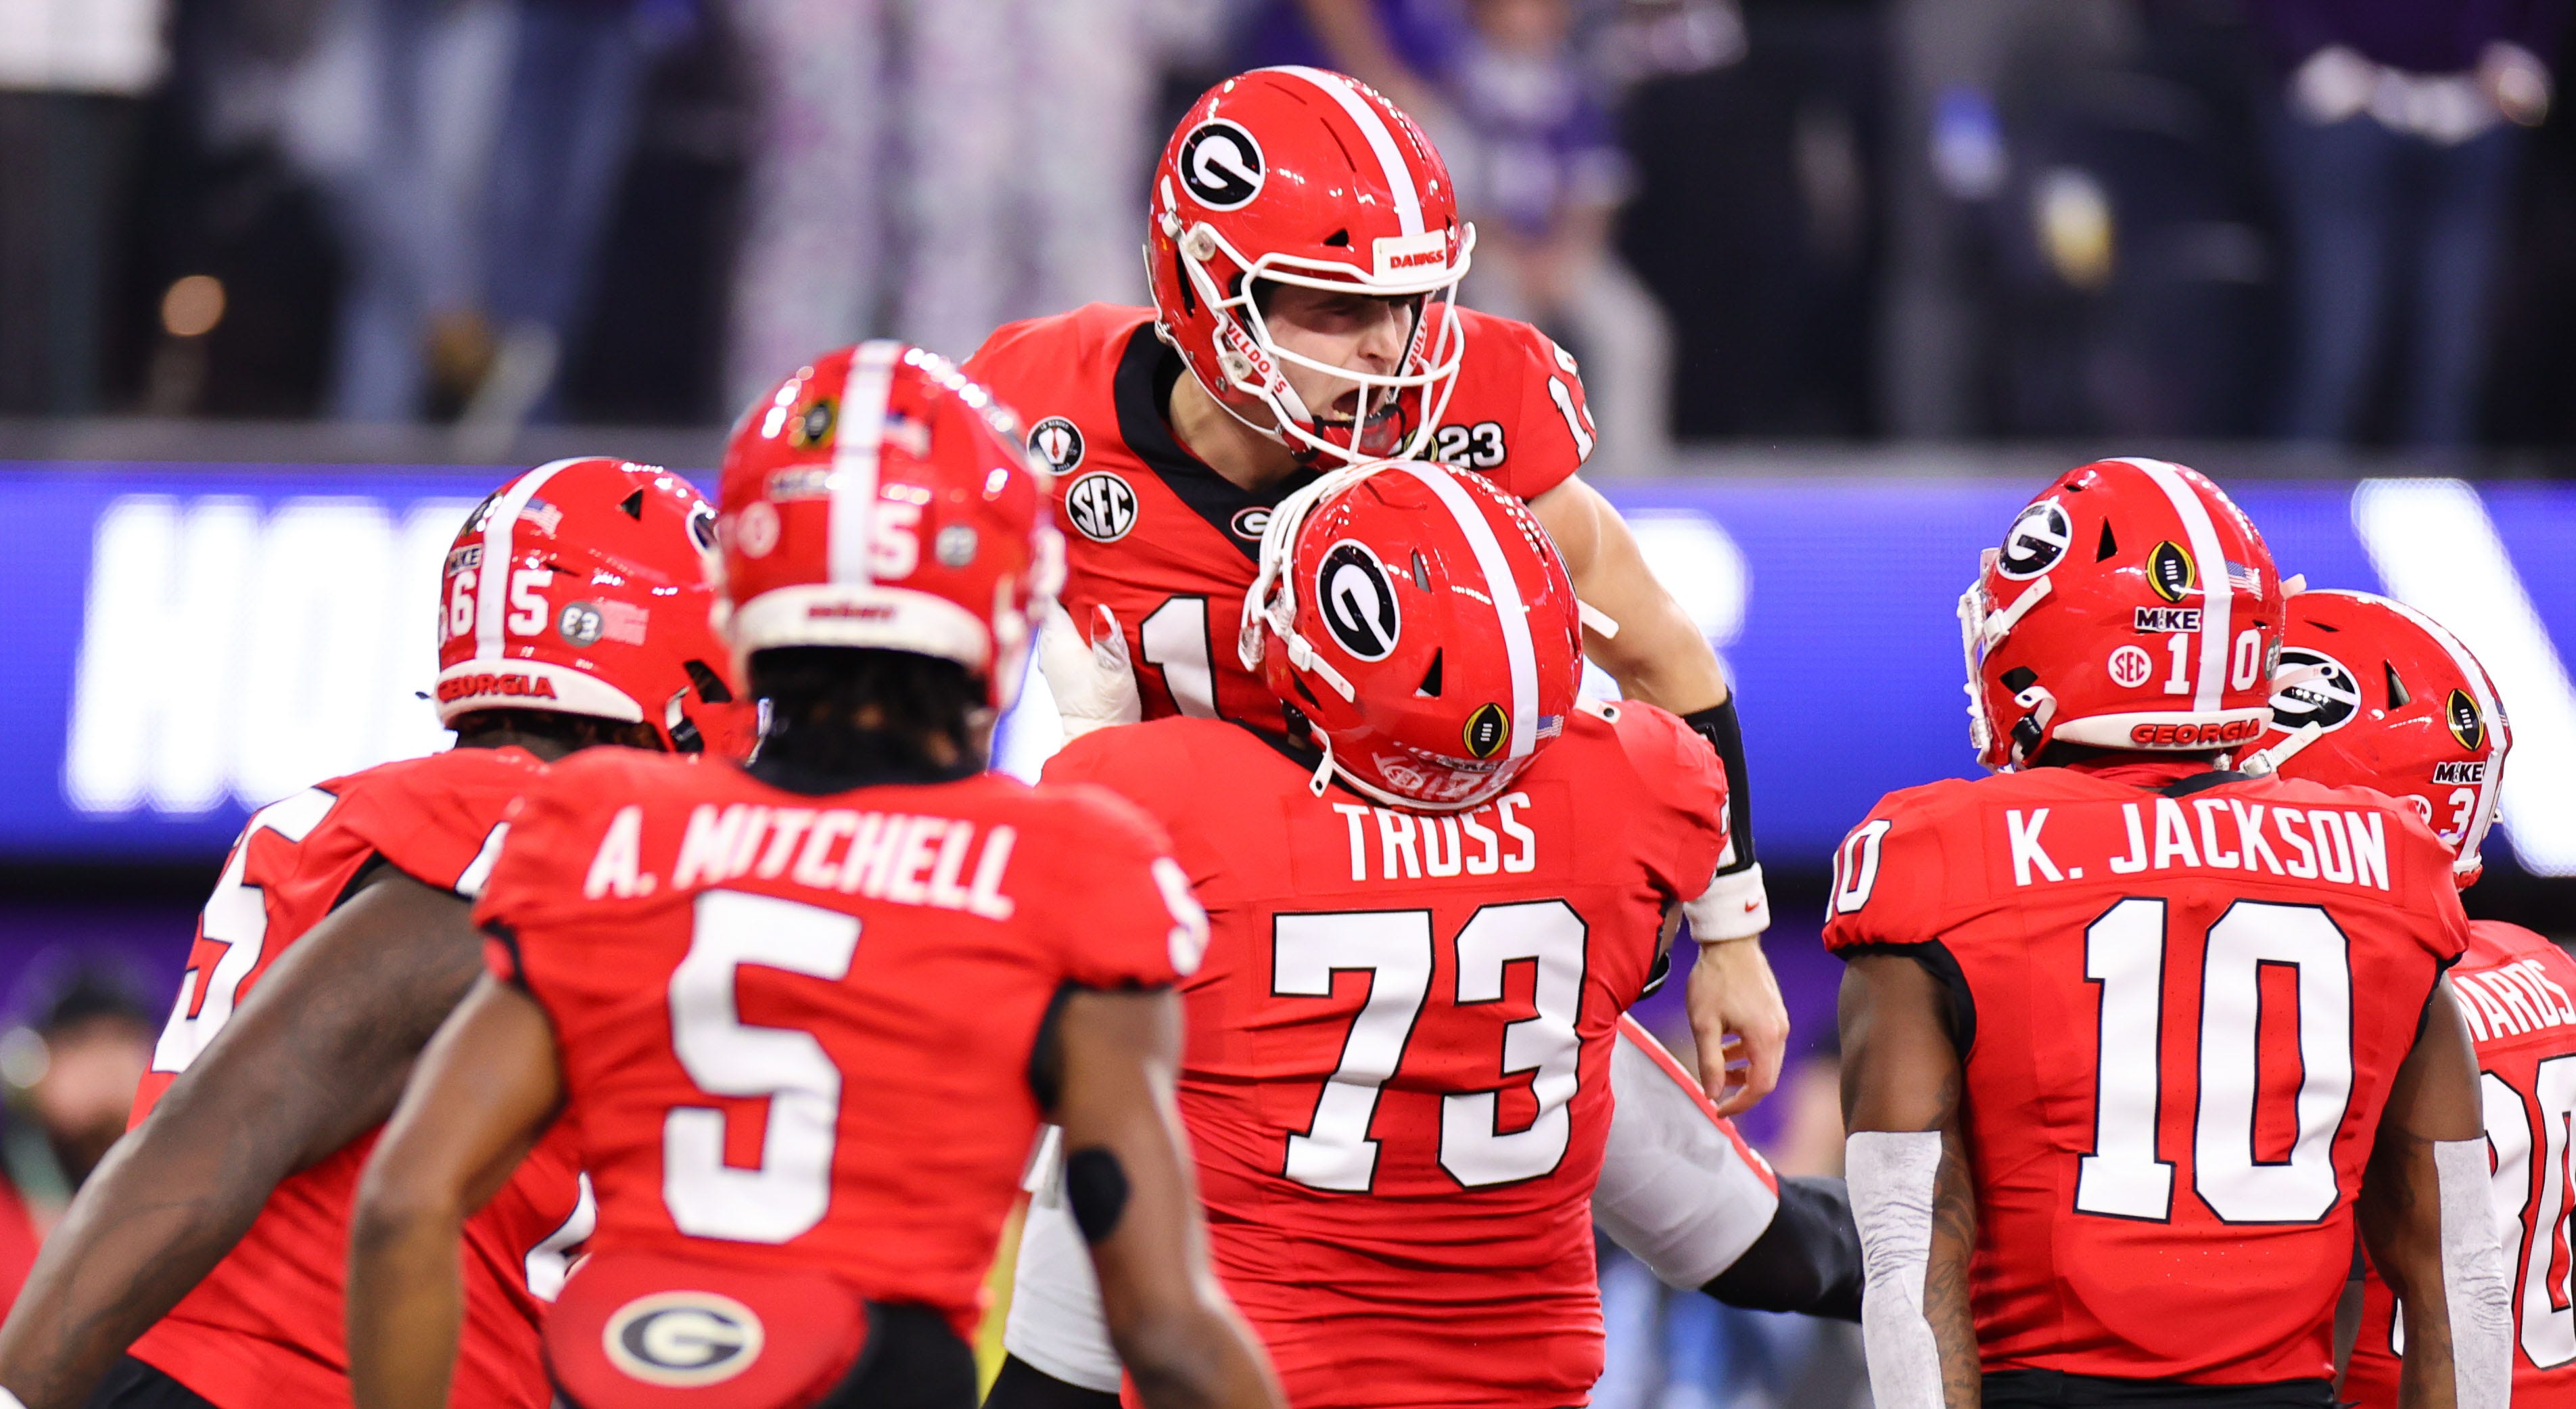 Georgia destroys TCU in CFP championship to earn repeat national title